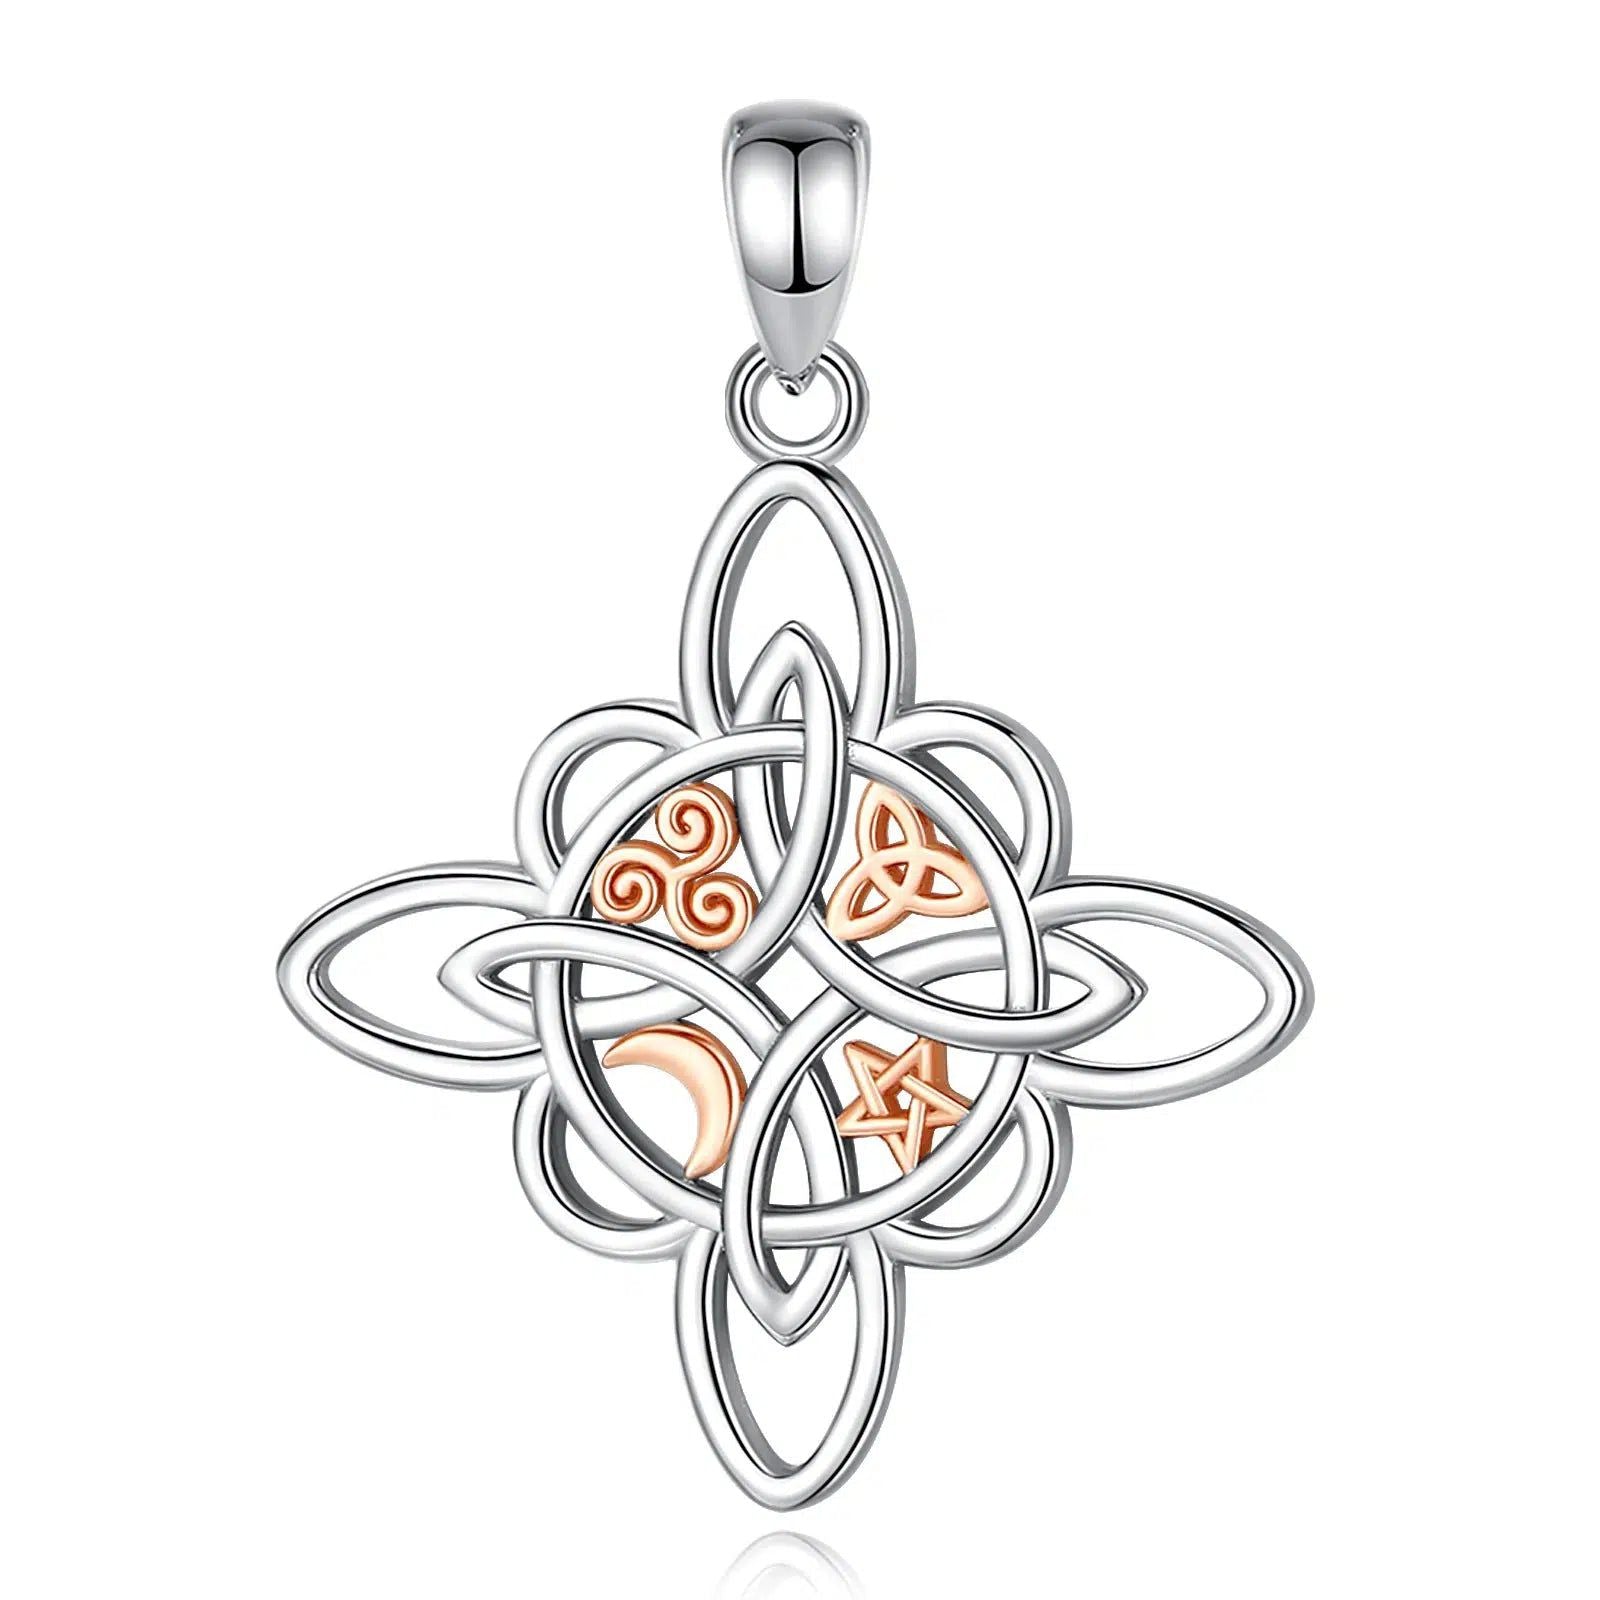 Witchcraft Celtic Knot Necklace Witch Jewelry-MoonChildWorld